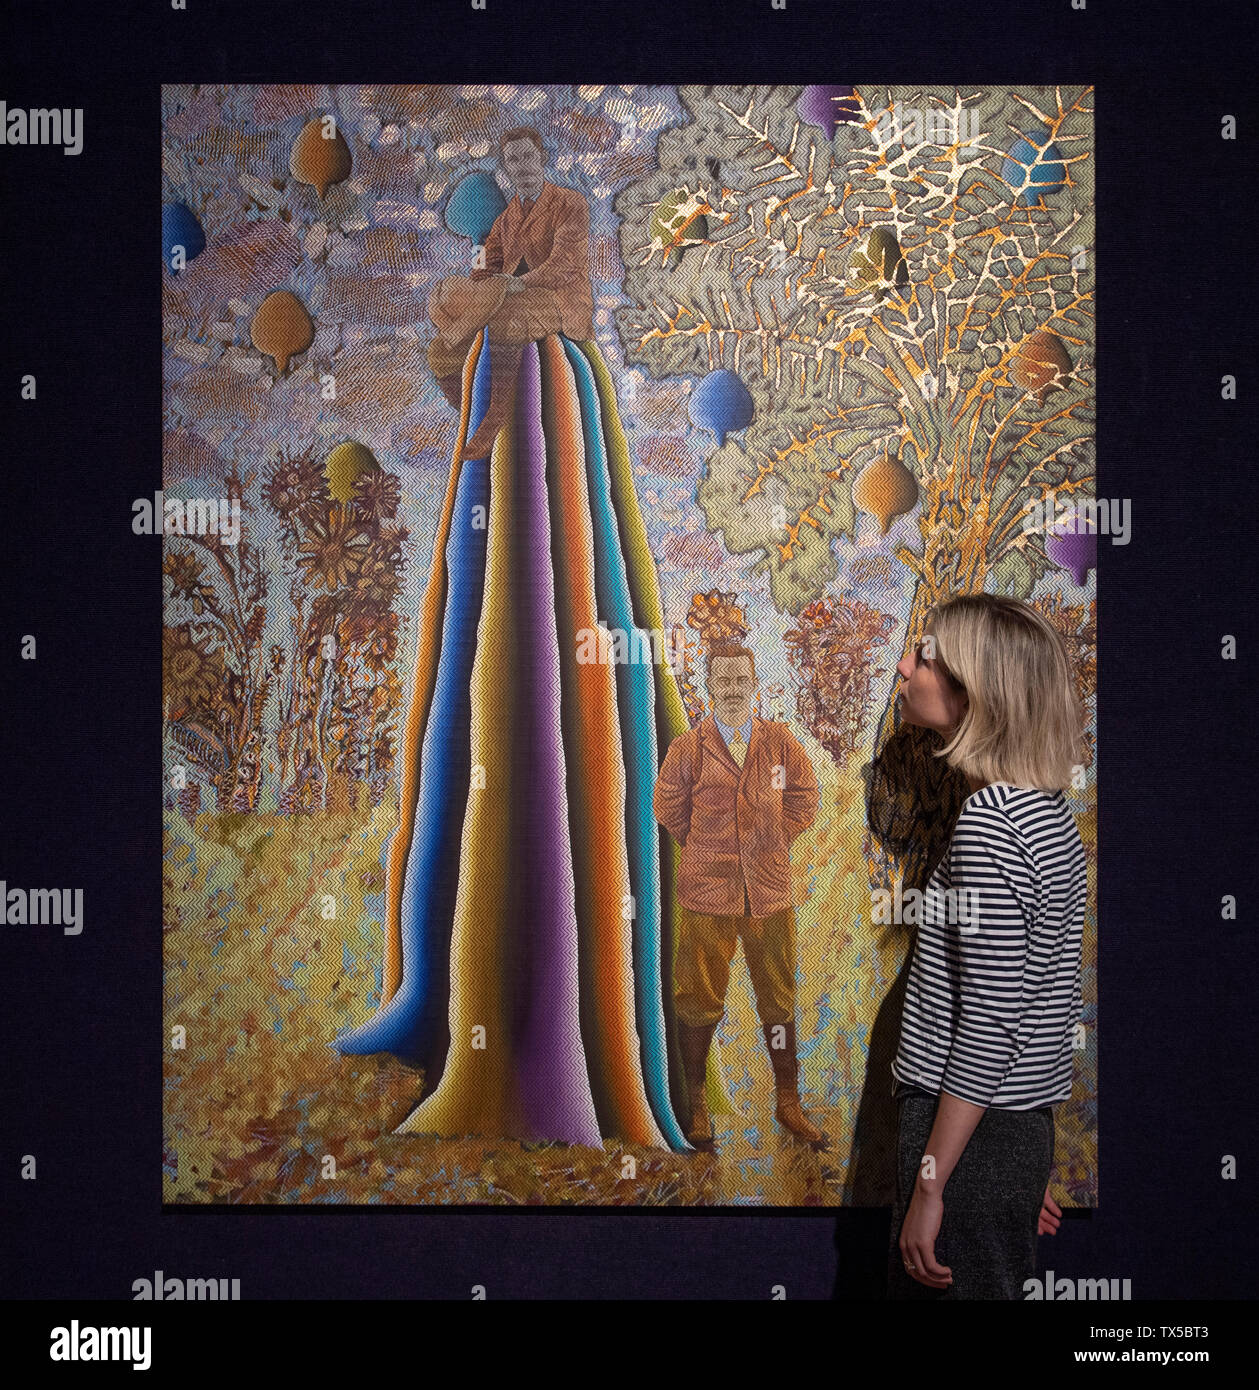 Bonhams, New Bond Street, London, UK. 24th June 2019. Modern and Contemporary Art preview before the sale on 27th June 2019. Image: David Brian Smith, Ant Hill Wednesday 2012, estimate £4,000-6,000. Credit: Malcolm Park/Alamy Live News. Stock Photo